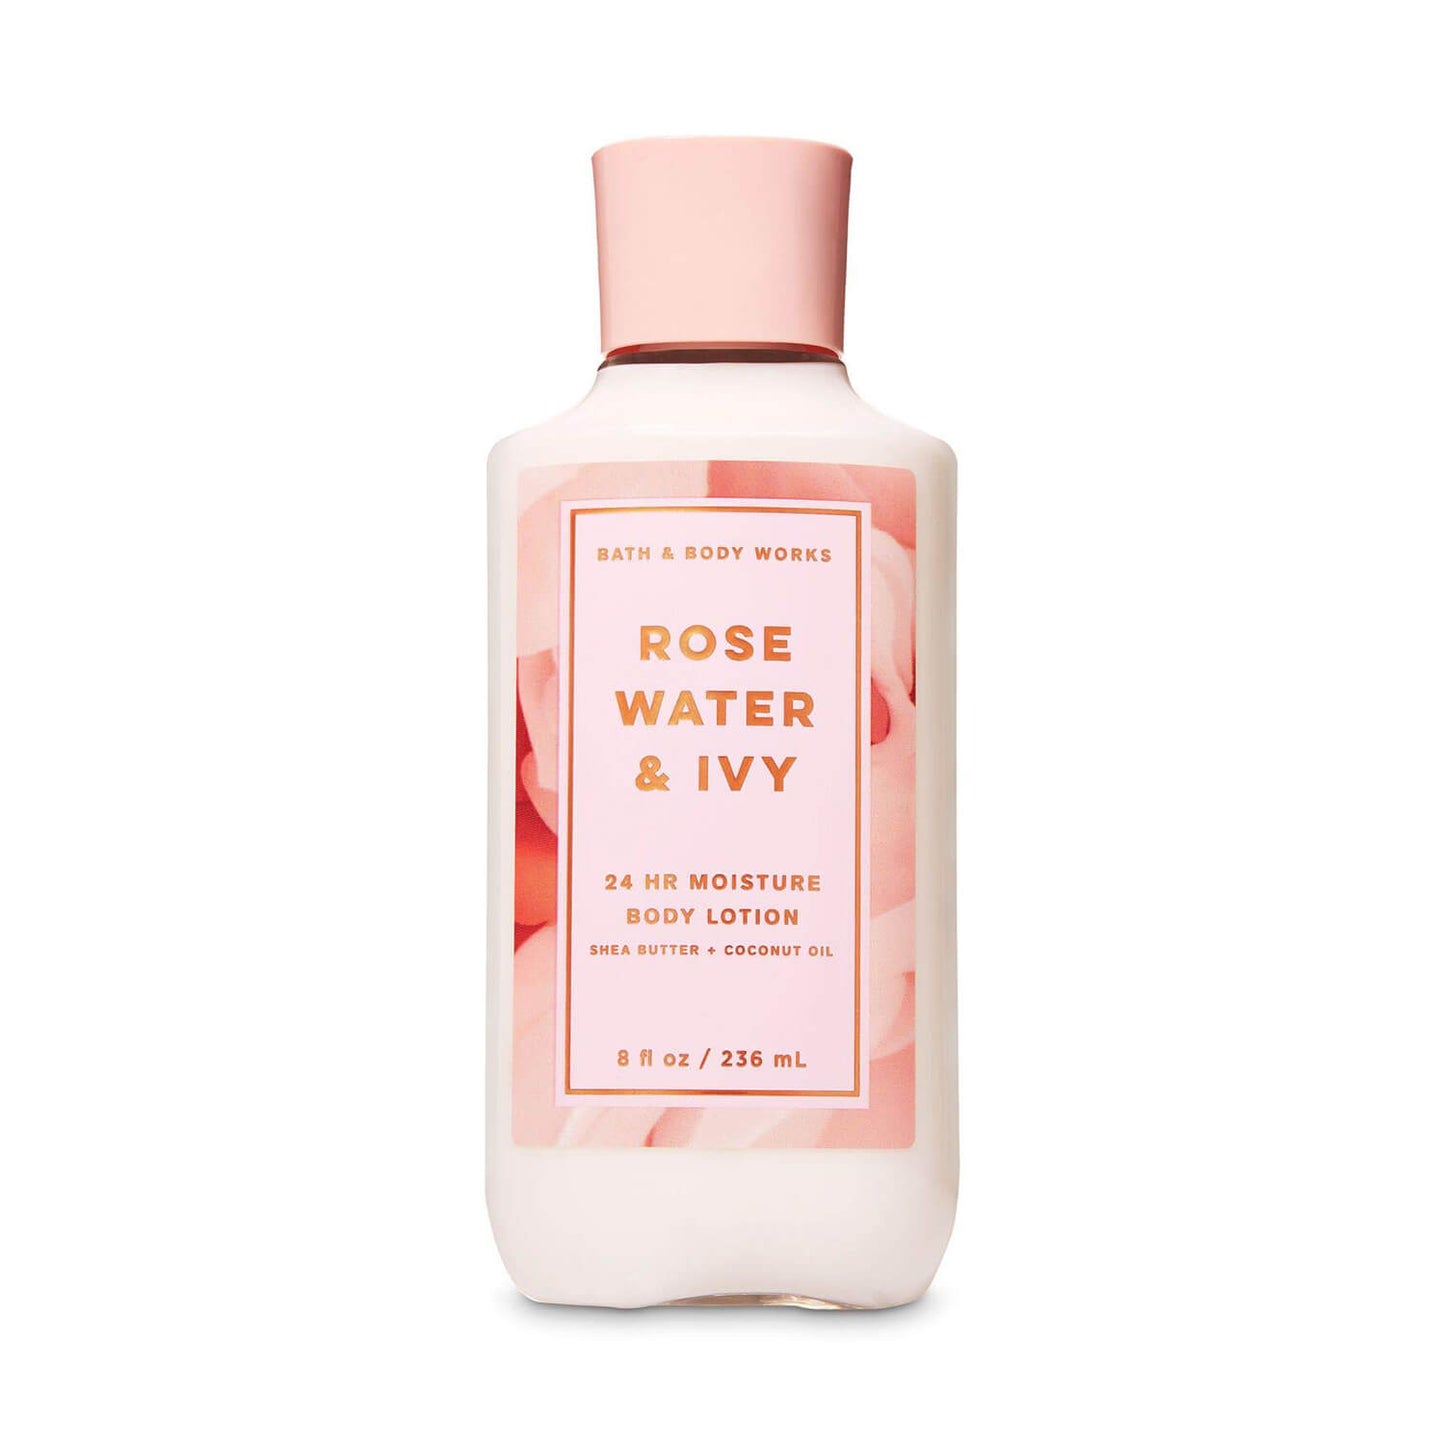 Bath and Body Works Body Lotion - Rose Water & Ivy